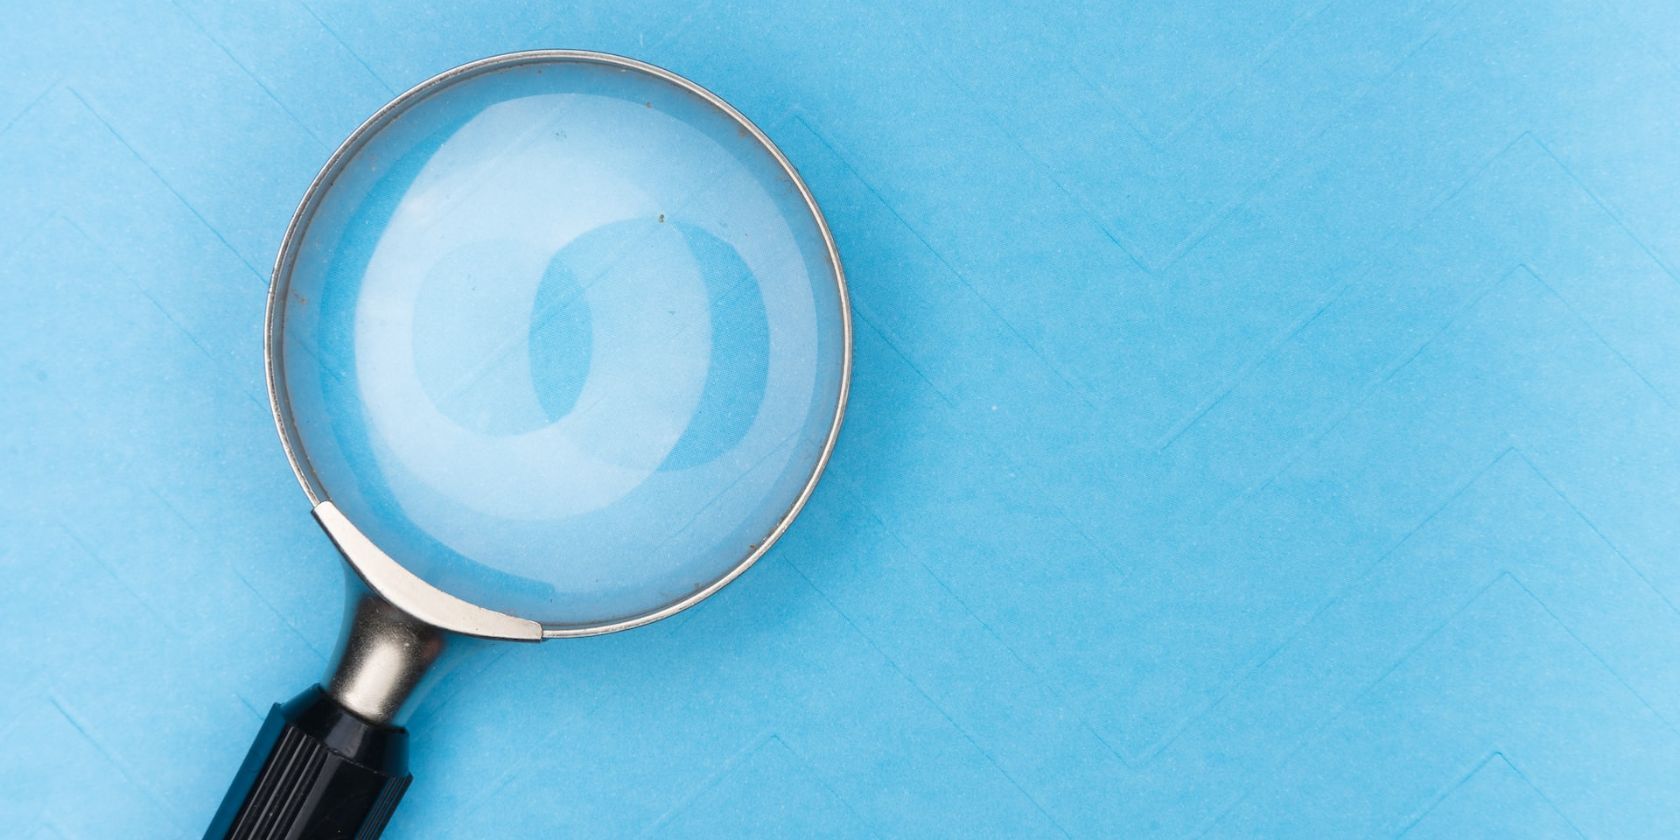 magnifying glass on blue background